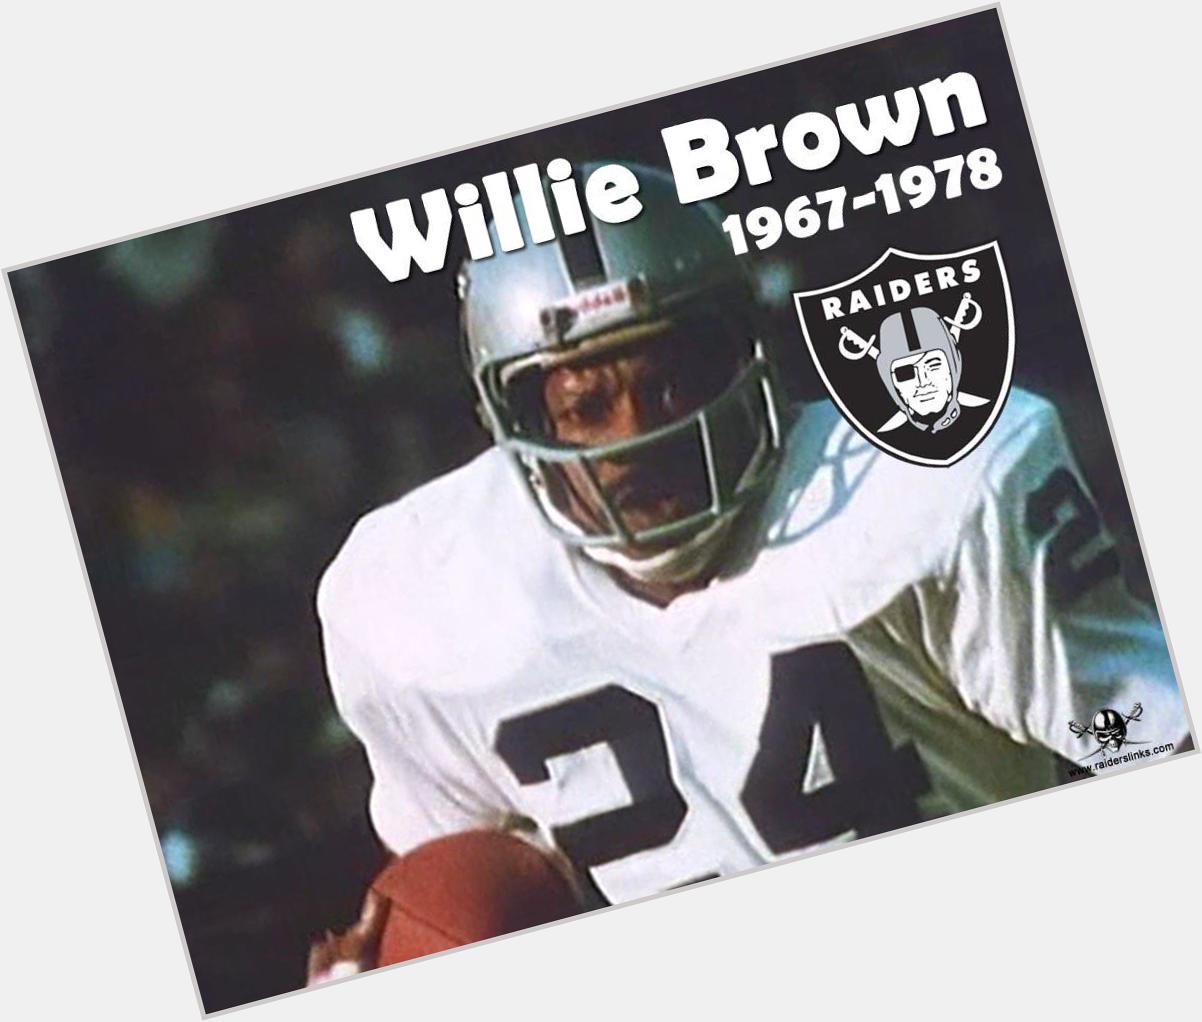 "HAPPY BIRTHDAY!!!"...TO "WILLIE BROWN".. 